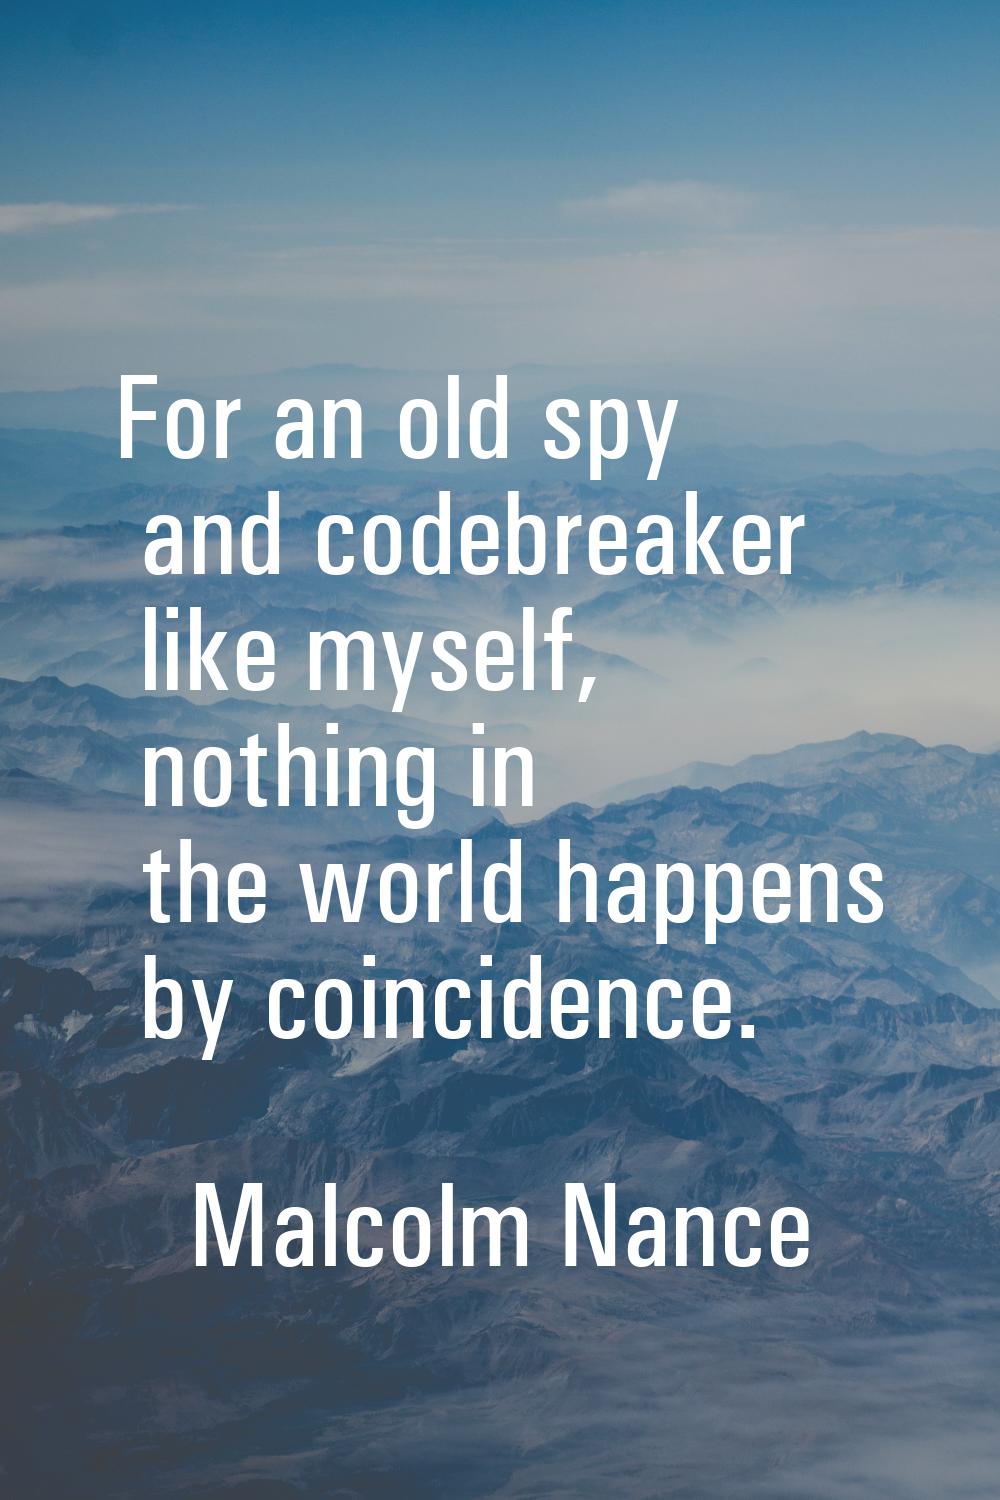 For an old spy and codebreaker like myself, nothing in the world happens by coincidence.